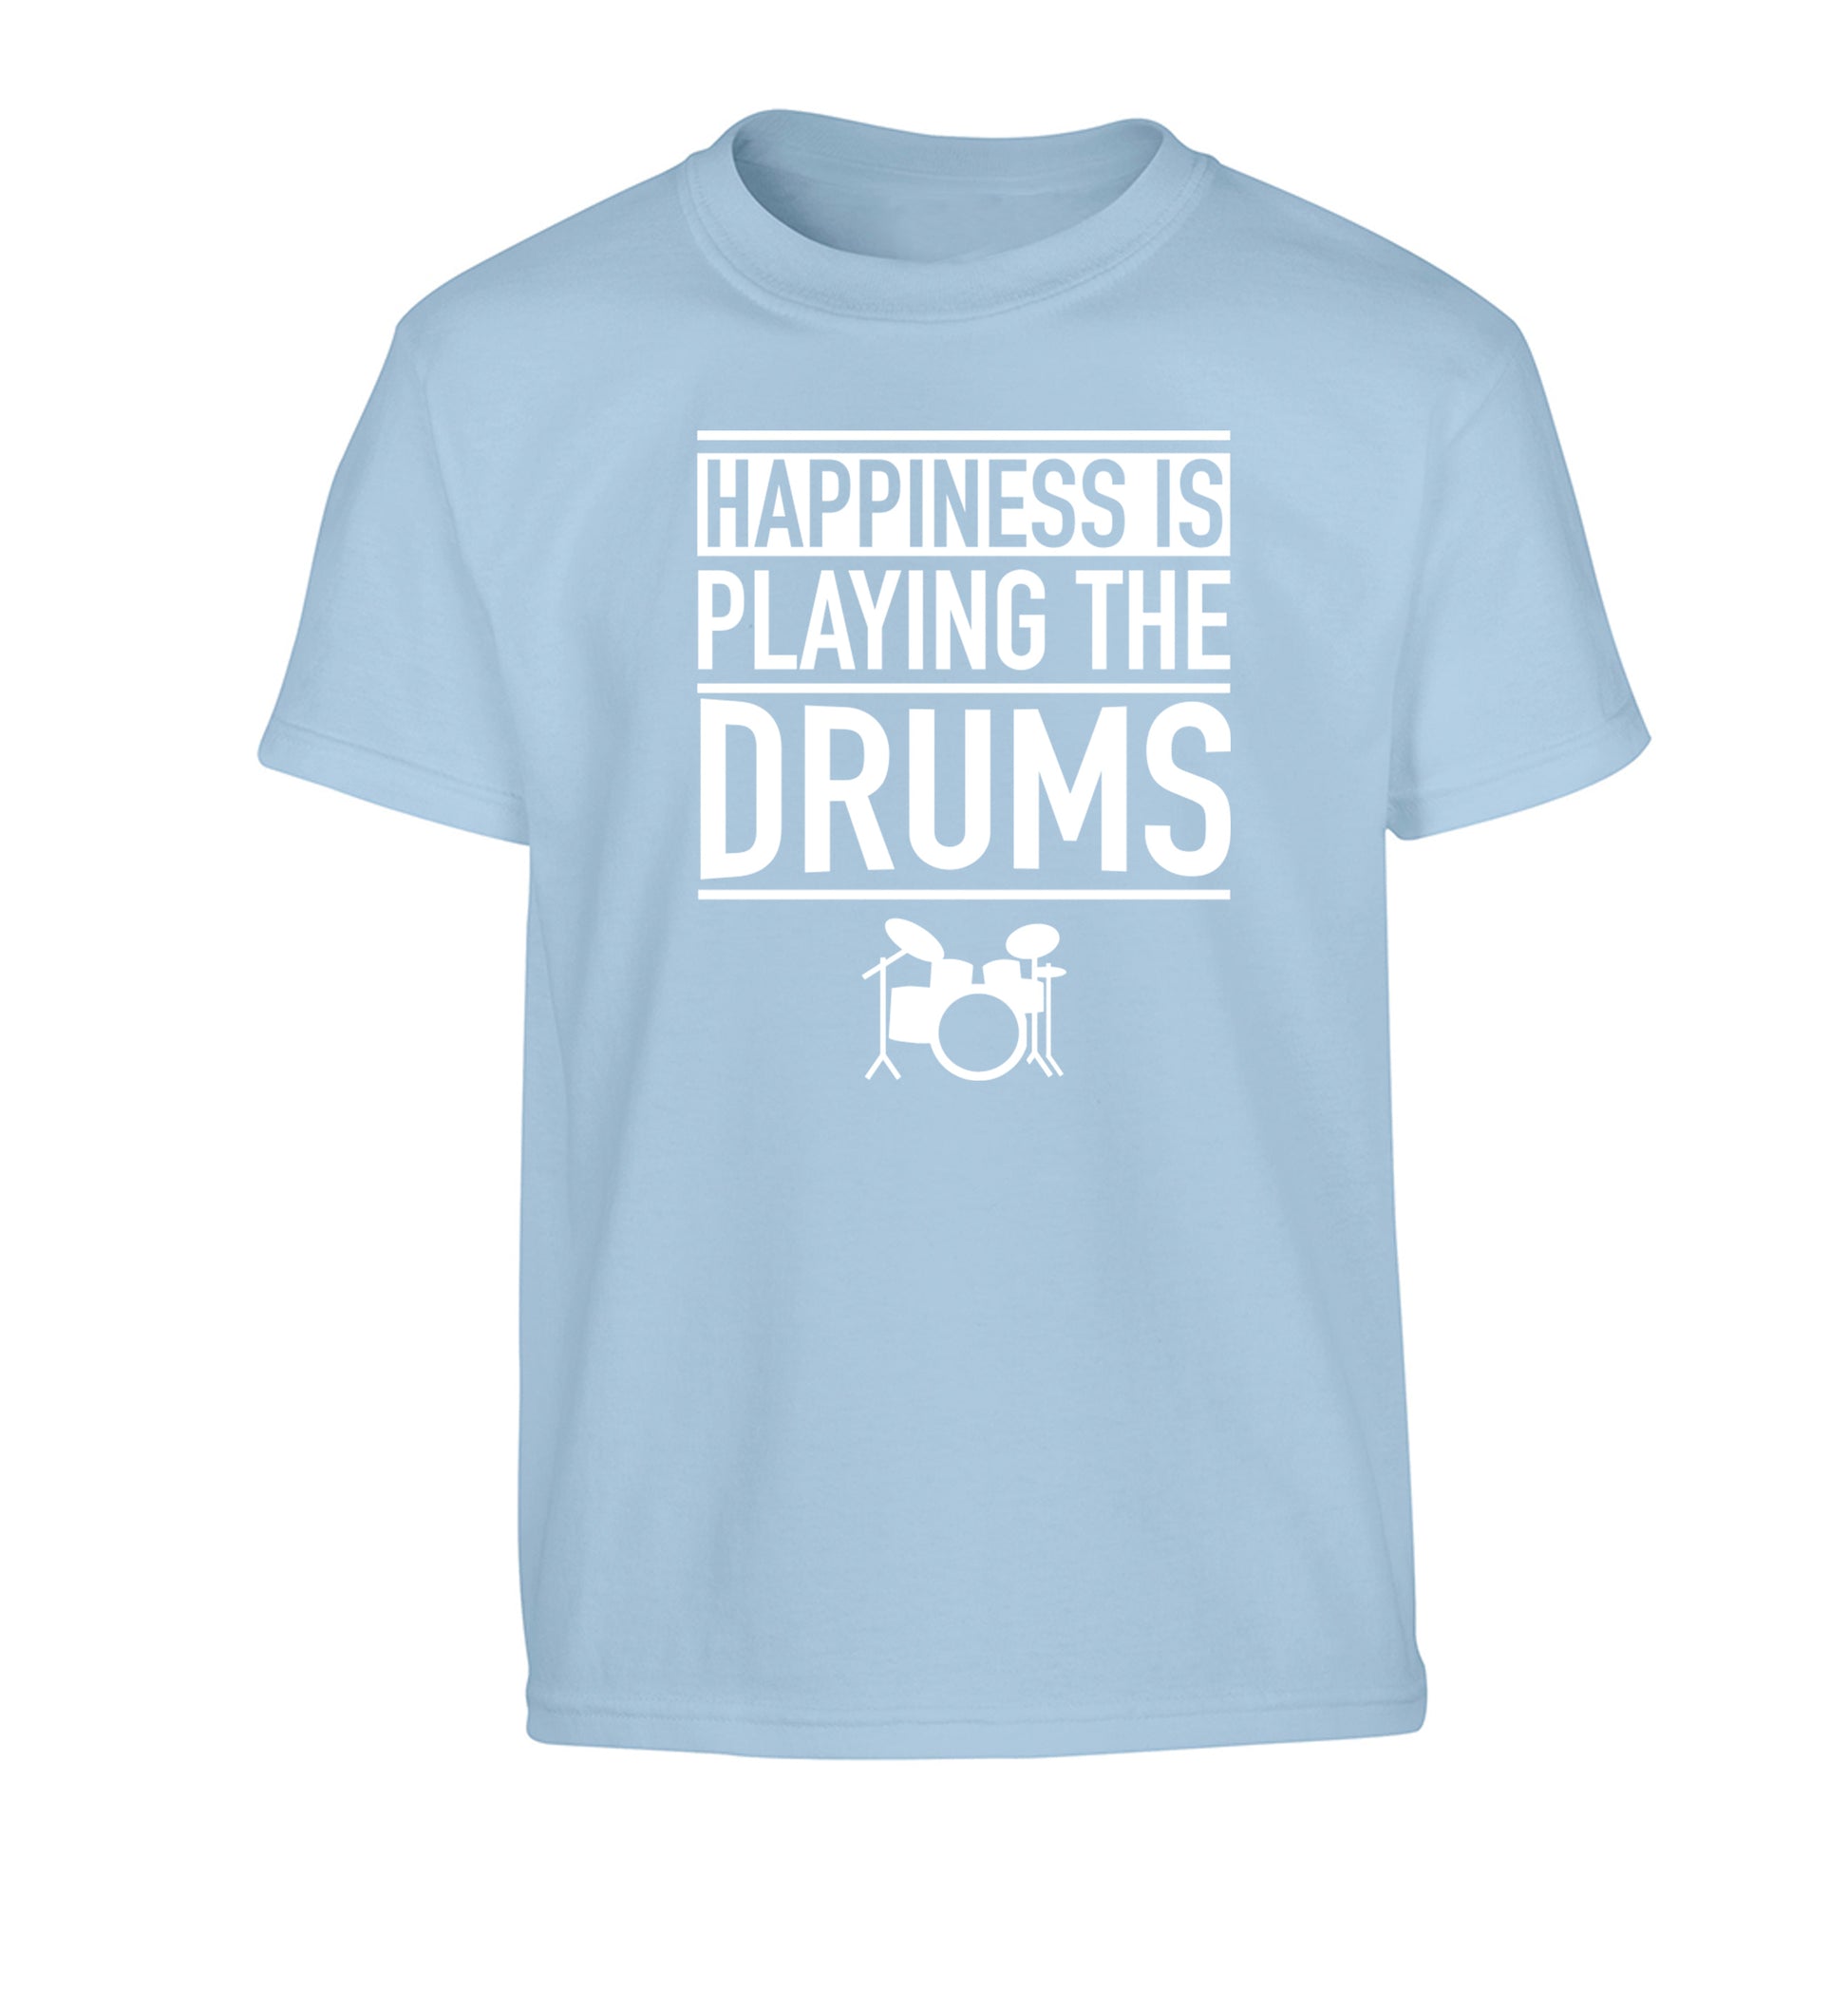 Happiness is playing the drums Children's light blue Tshirt 12-14 Years